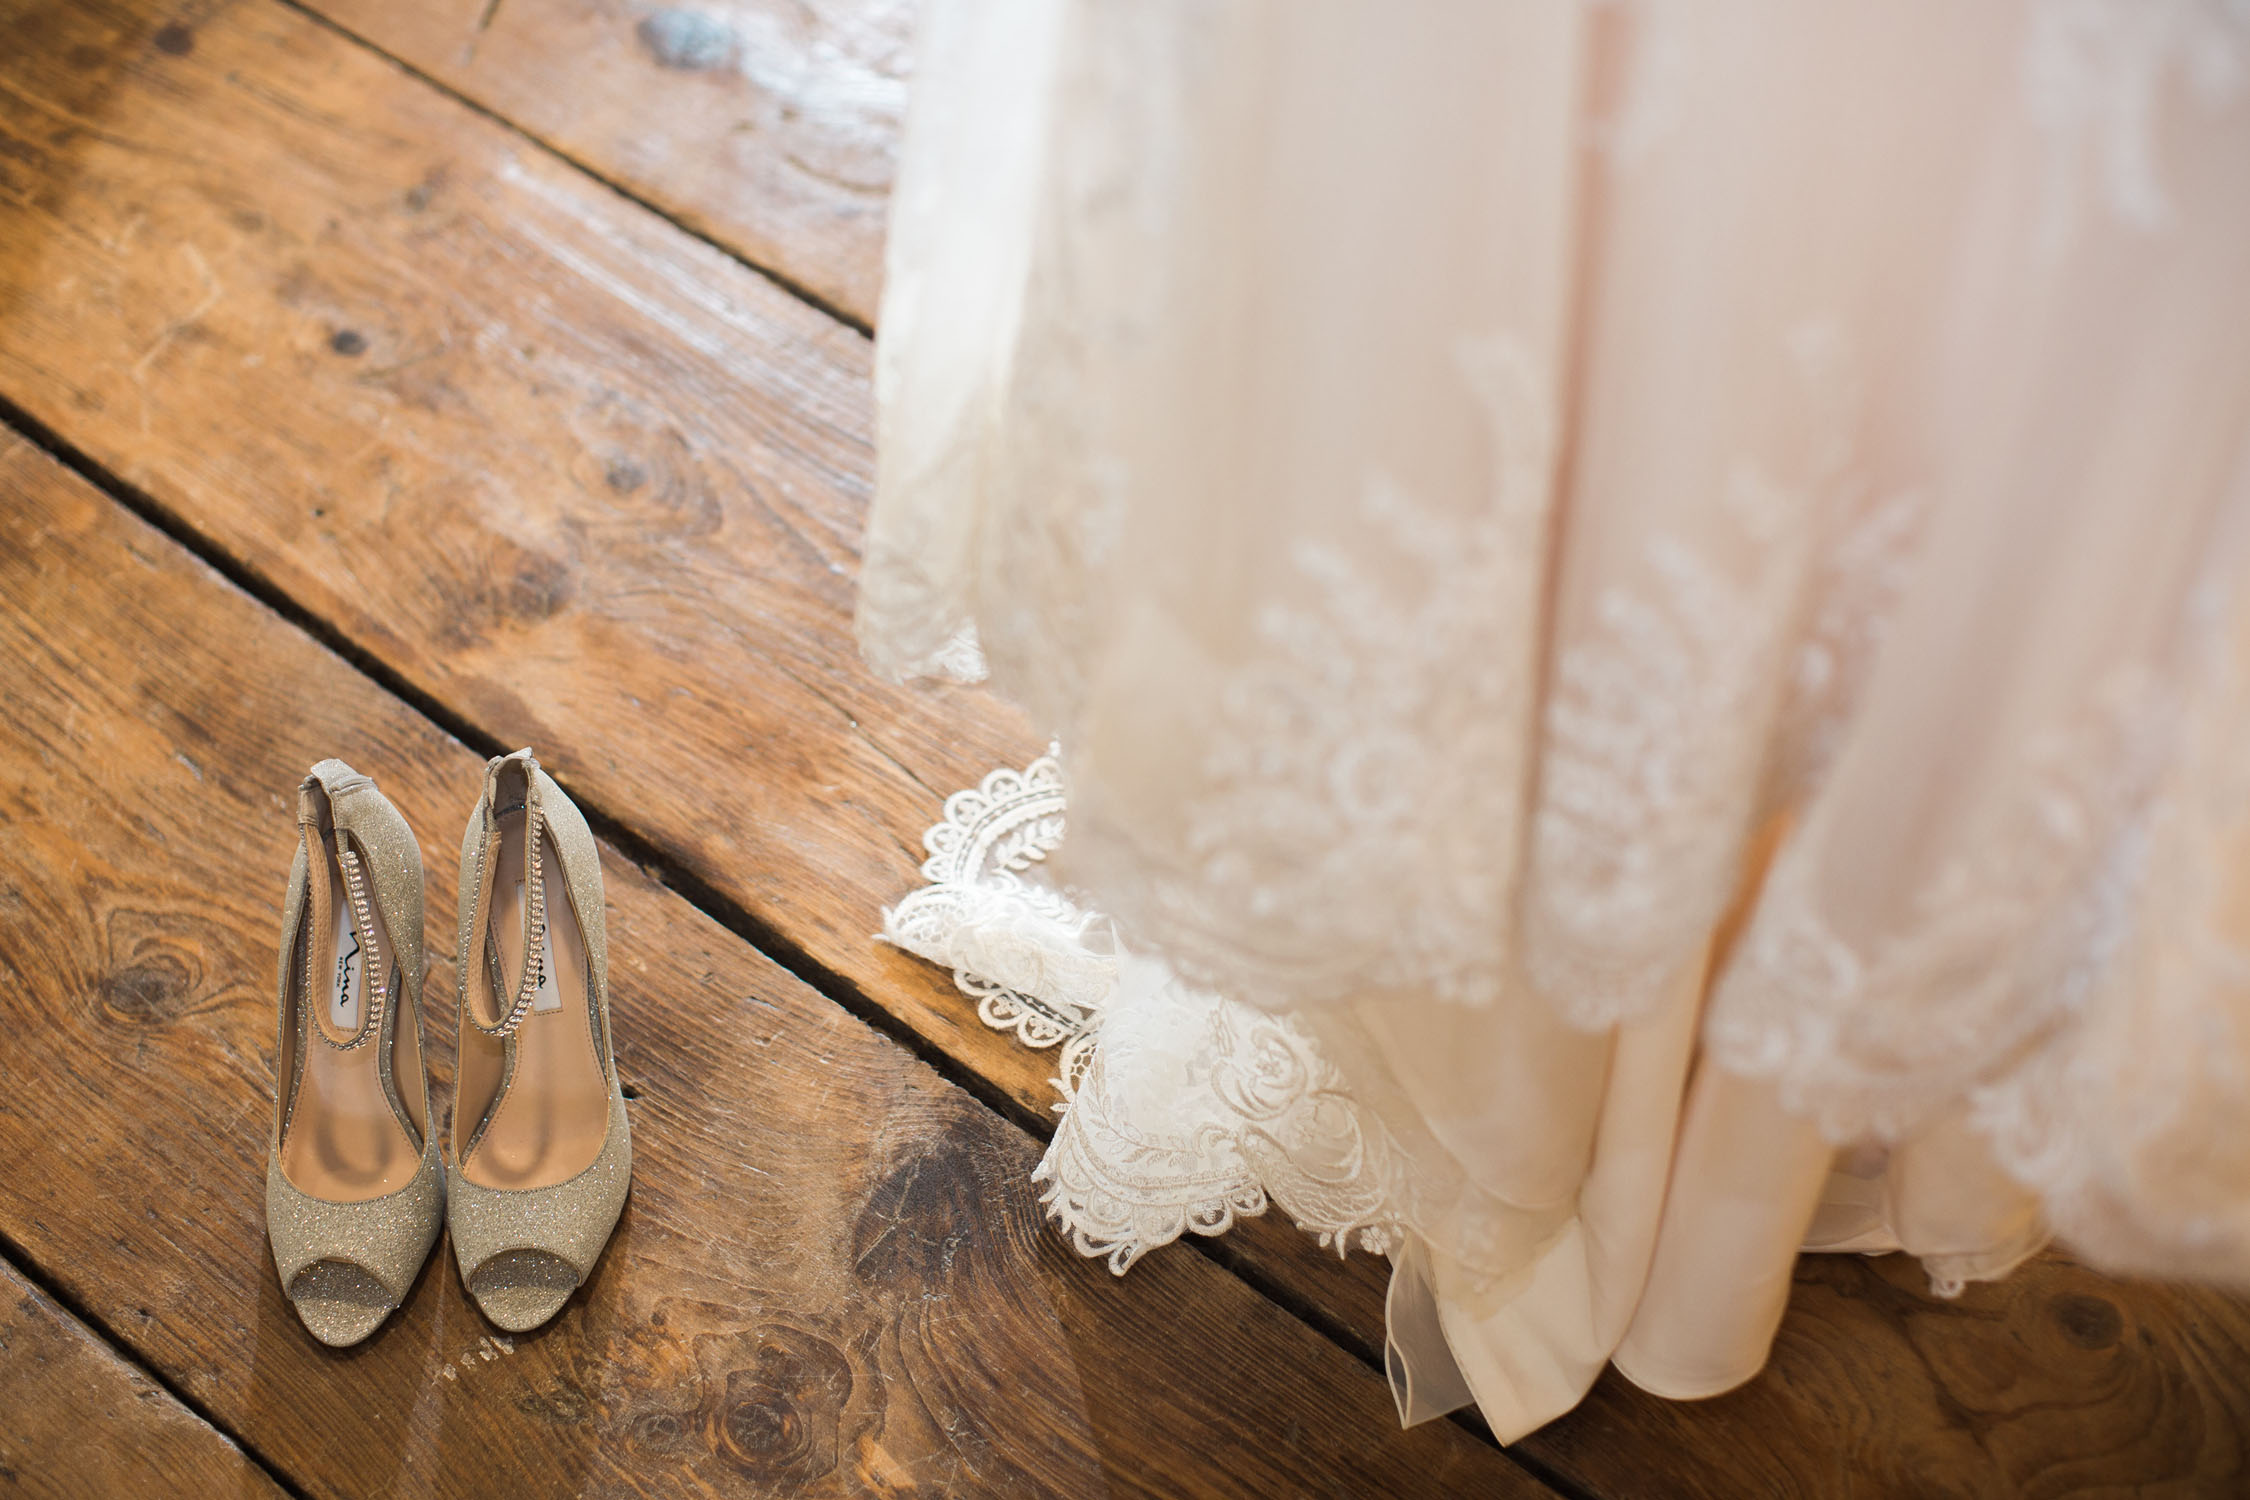 Picture showing shoes and wedding dress.